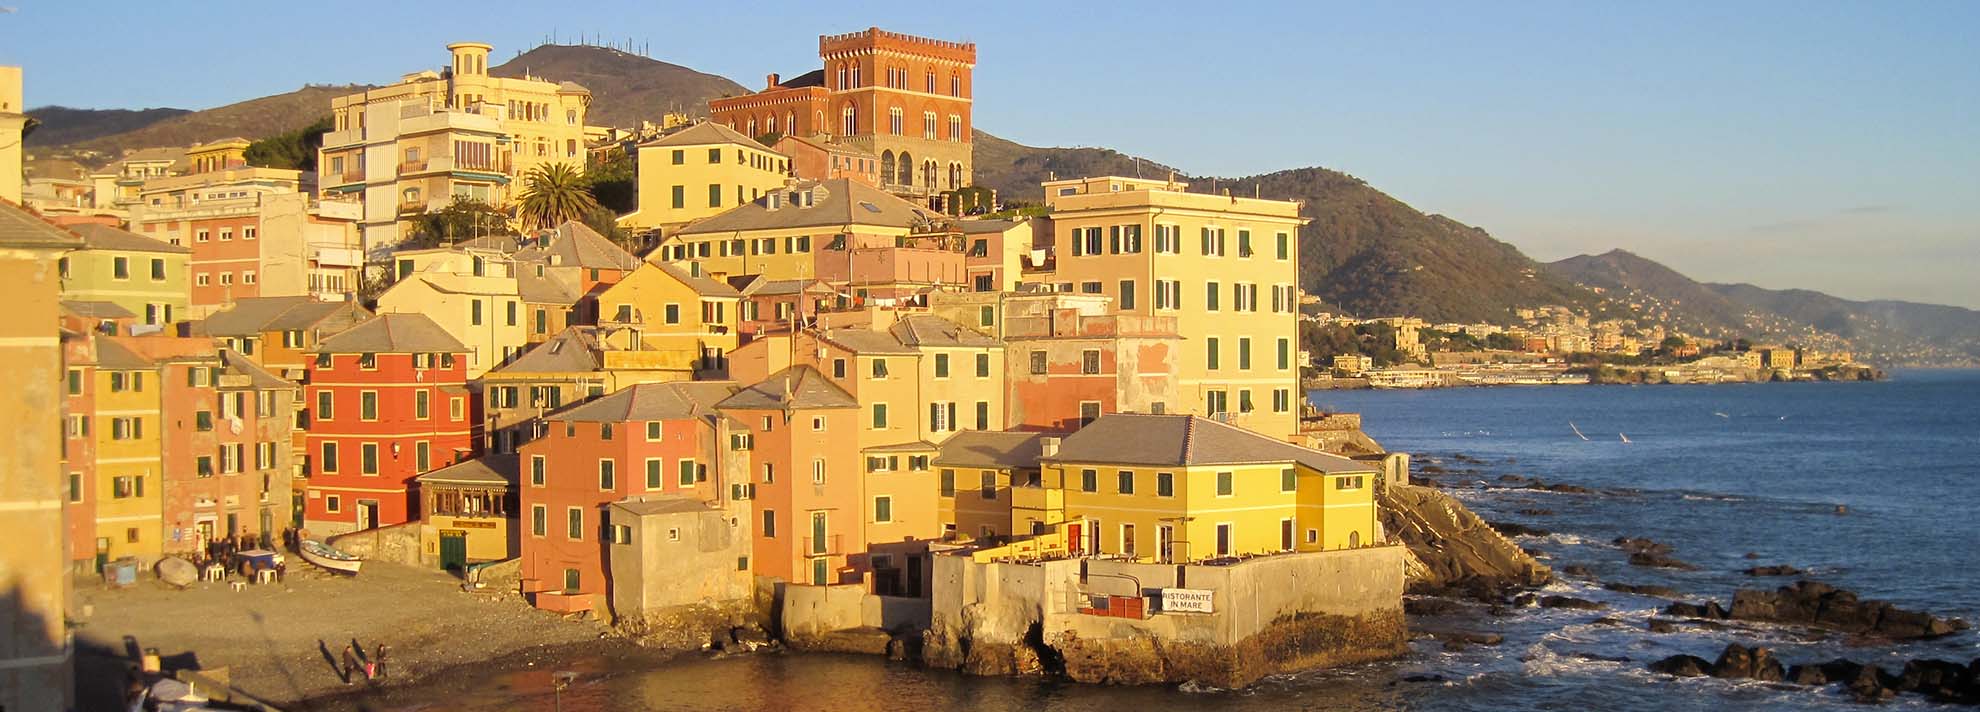 Boccadasse: the village of Livia and the cat